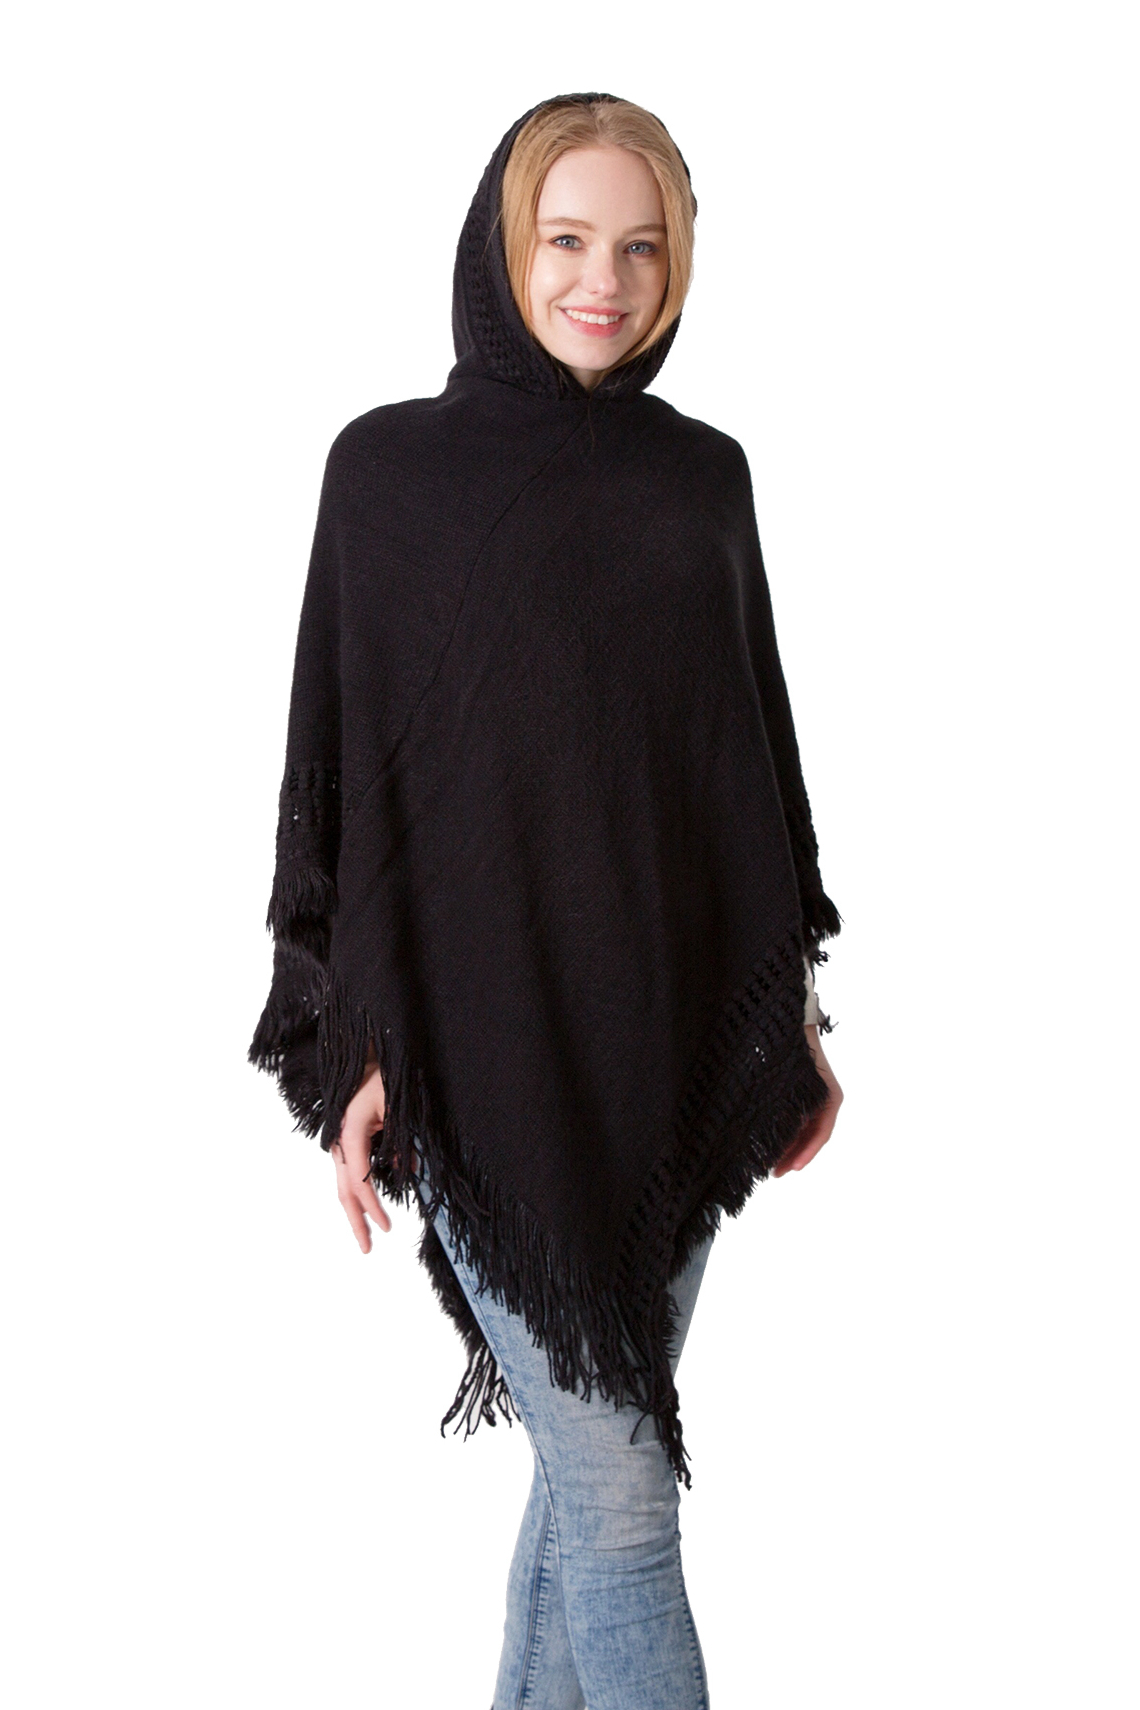 Women's Crochet Poncho Knitting Hooded Cape with Fringed ...